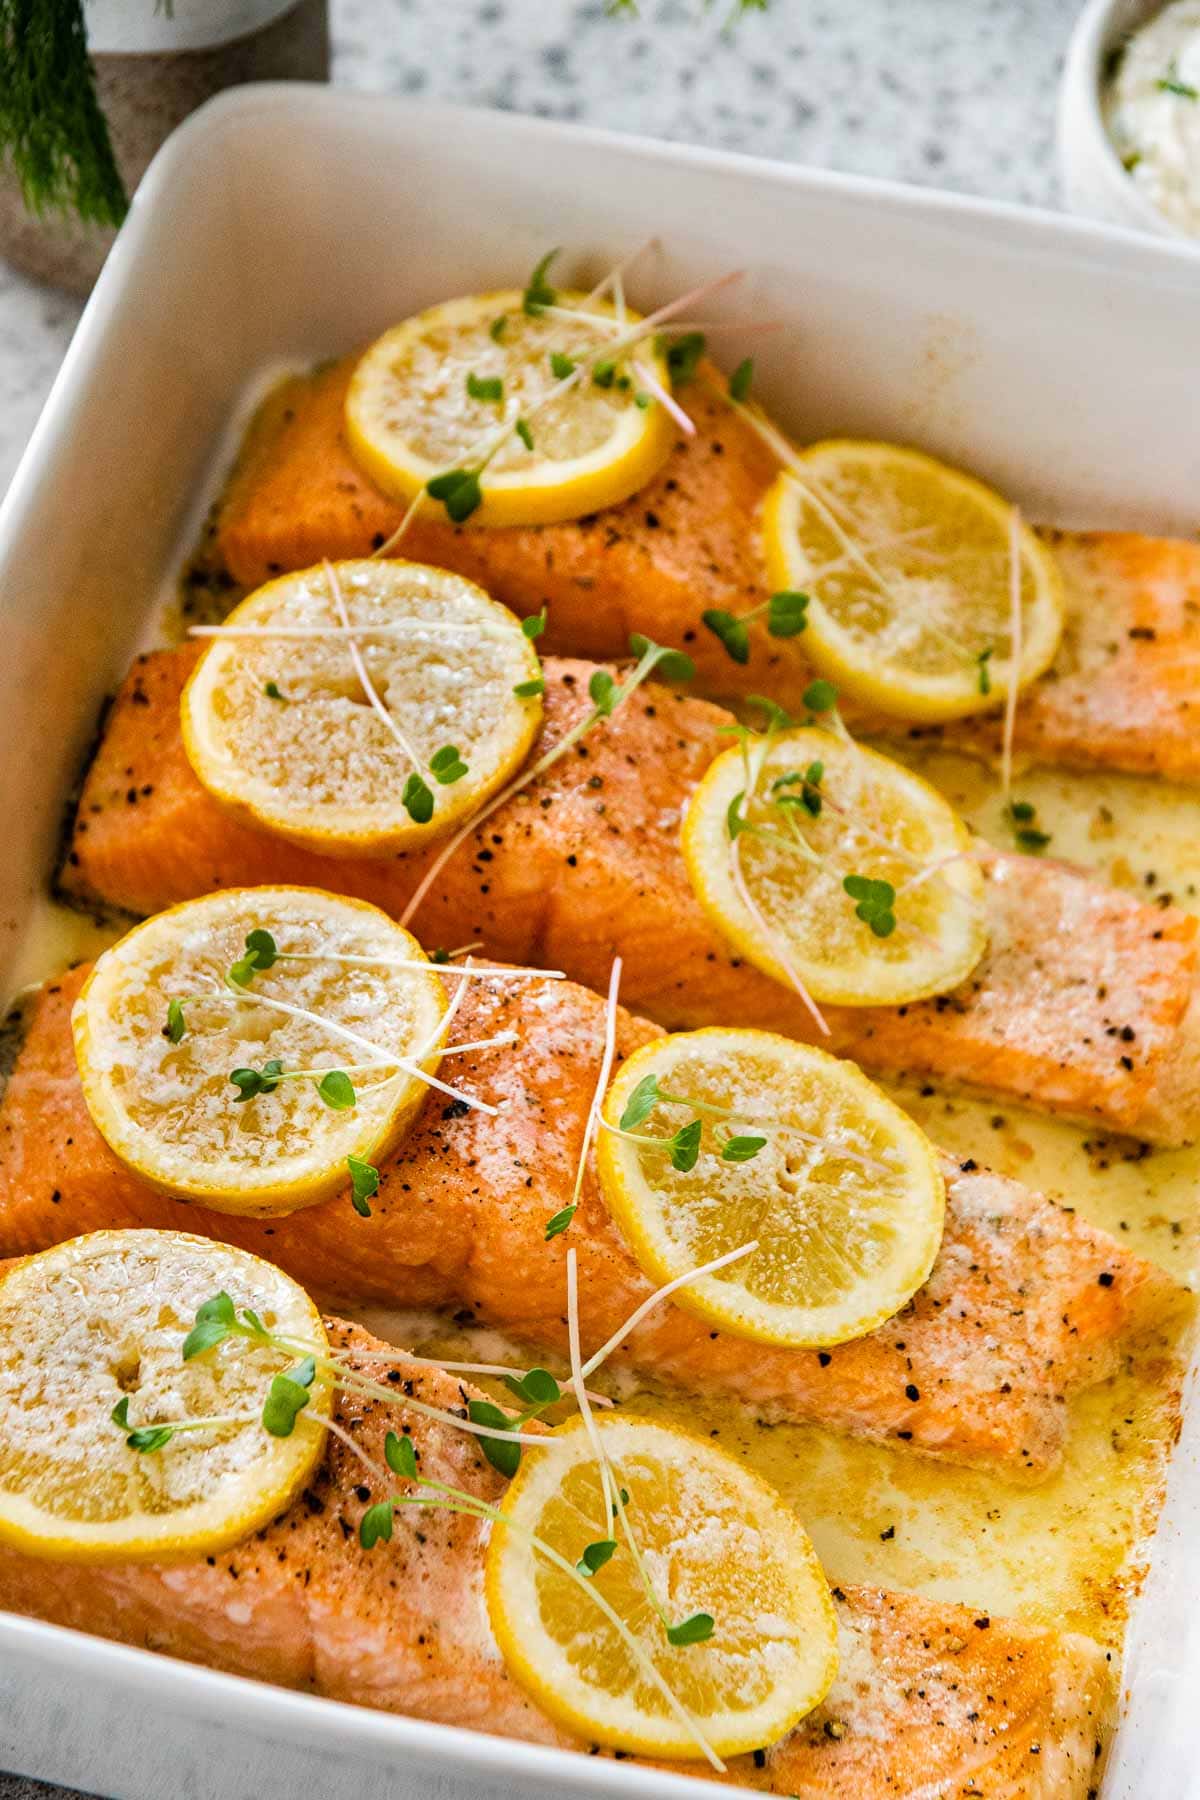 Baked Salmon with Dill Sauce salmon filets in baking dish with lemon slices after baking